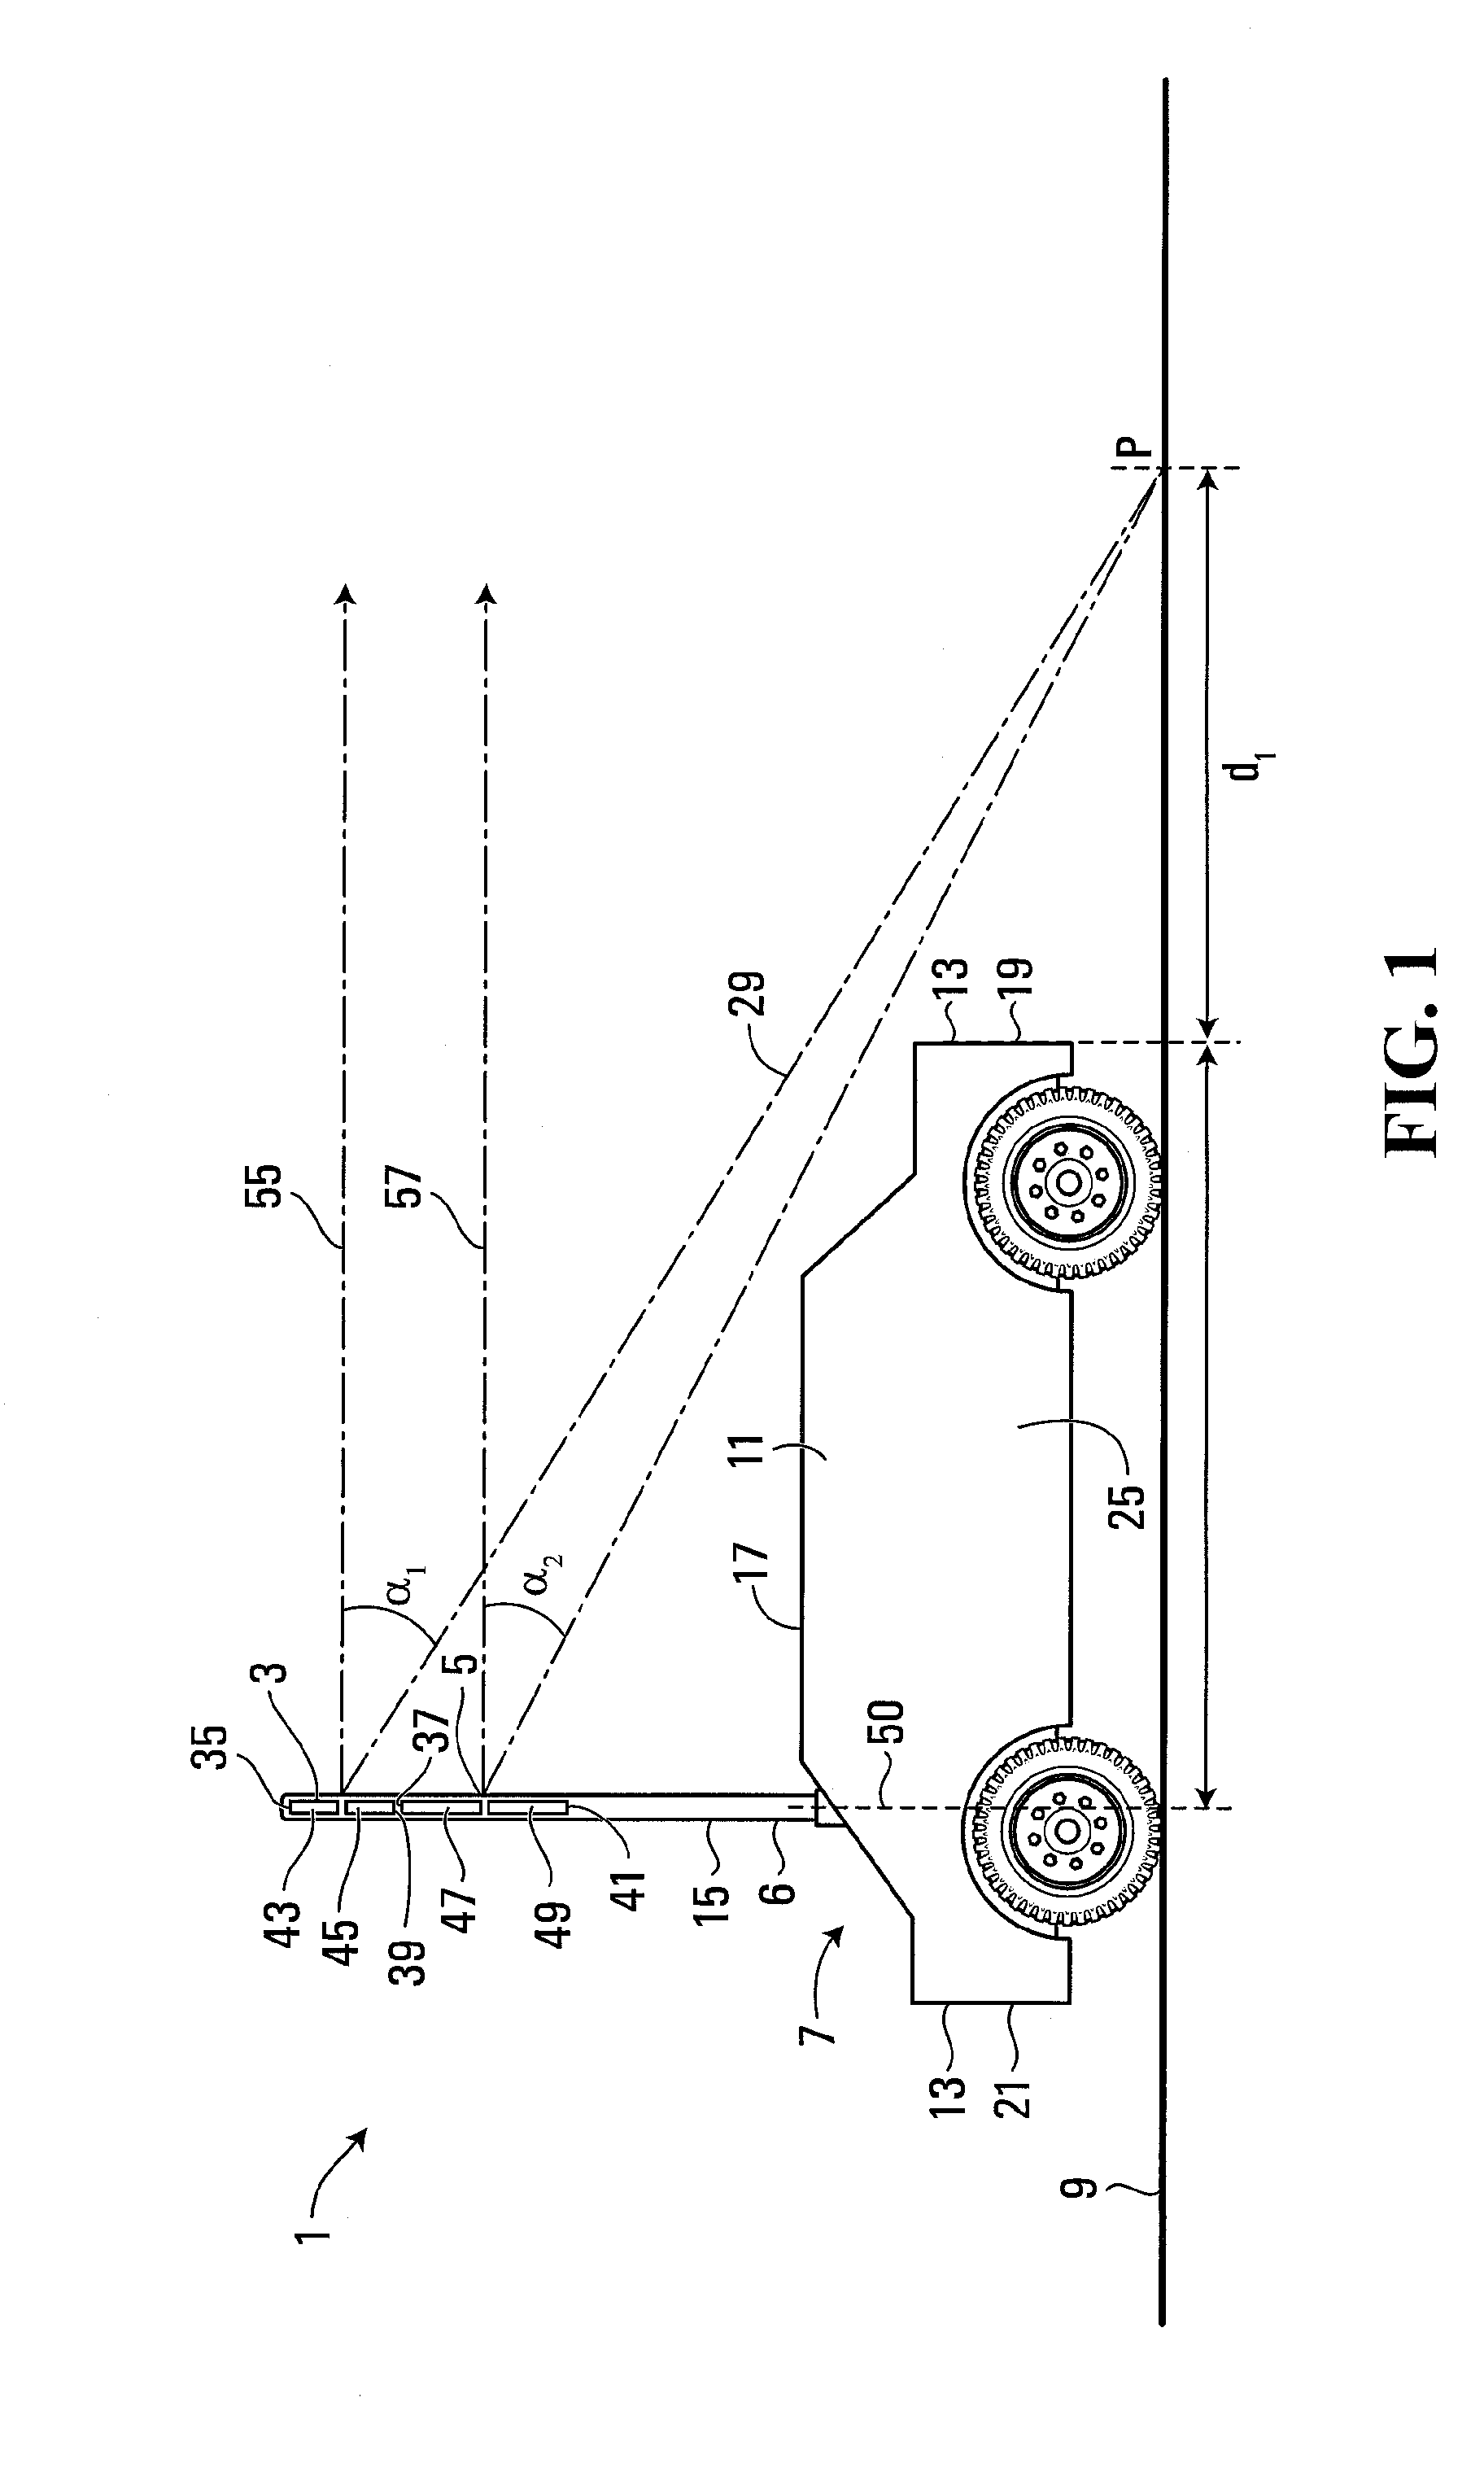 Radio antenna assembly and apparatus for controlling transmission and reception of RF signals